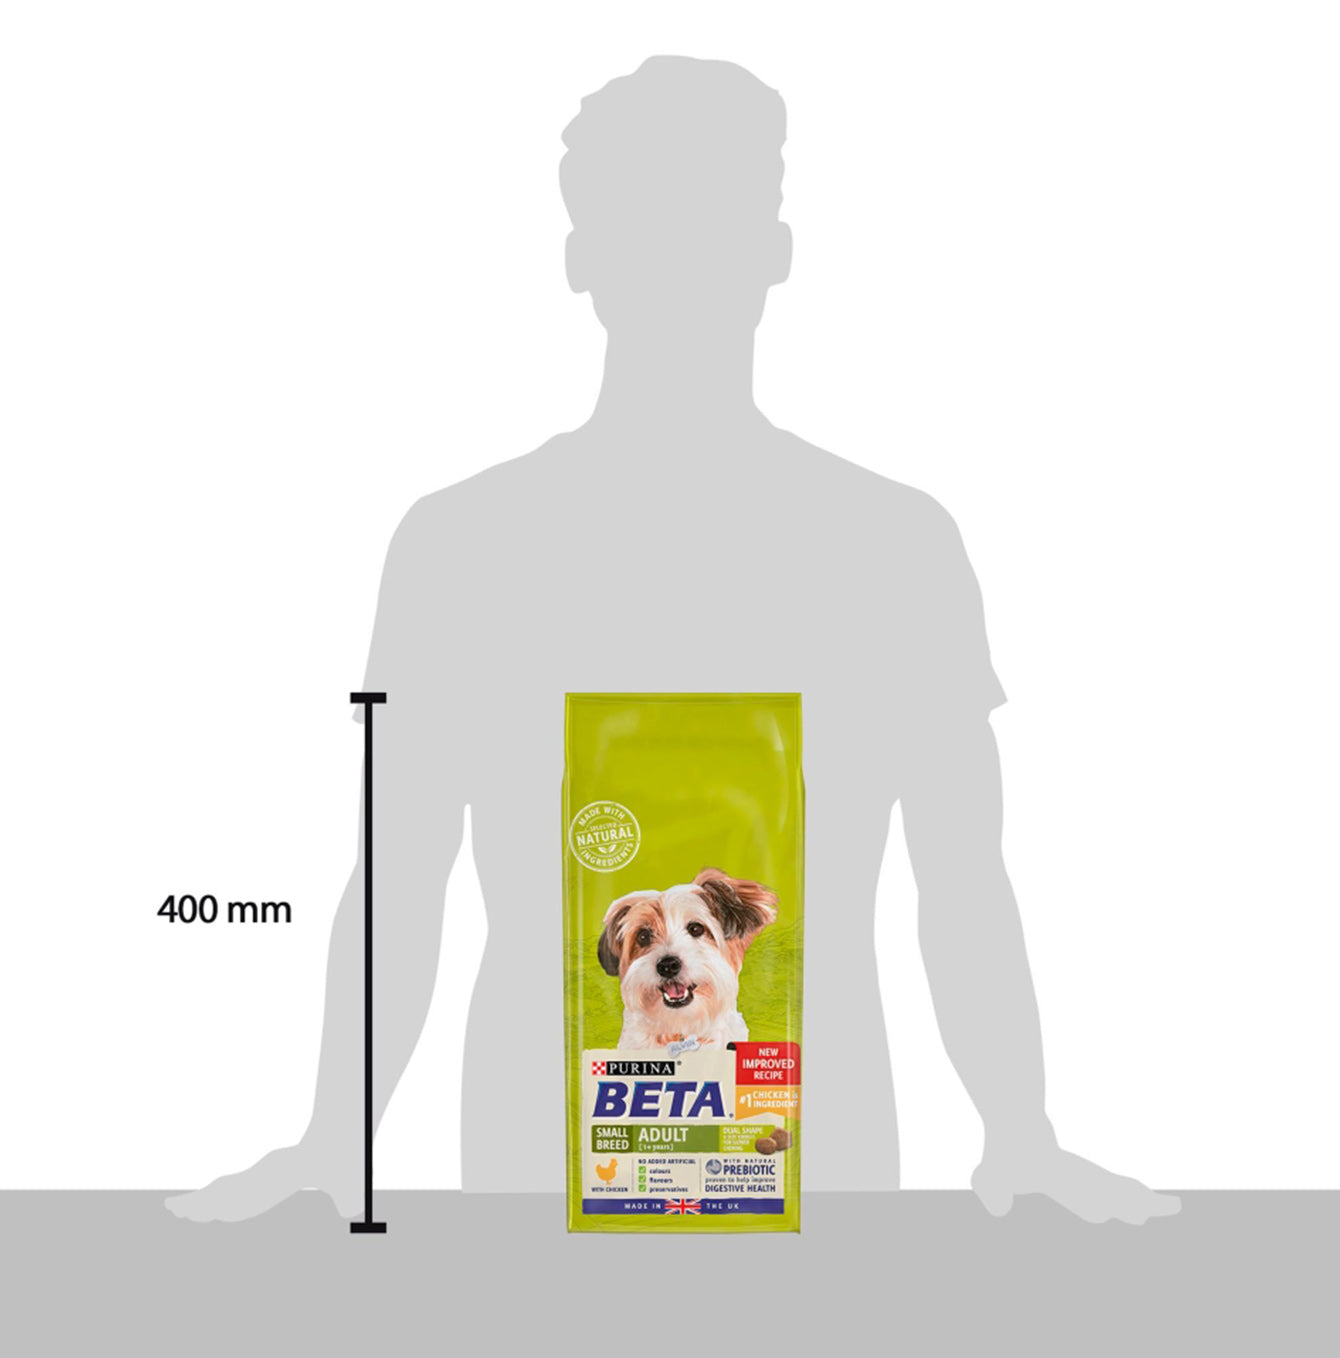 Purina beta adult small breed dog food chicken 2kg size guide